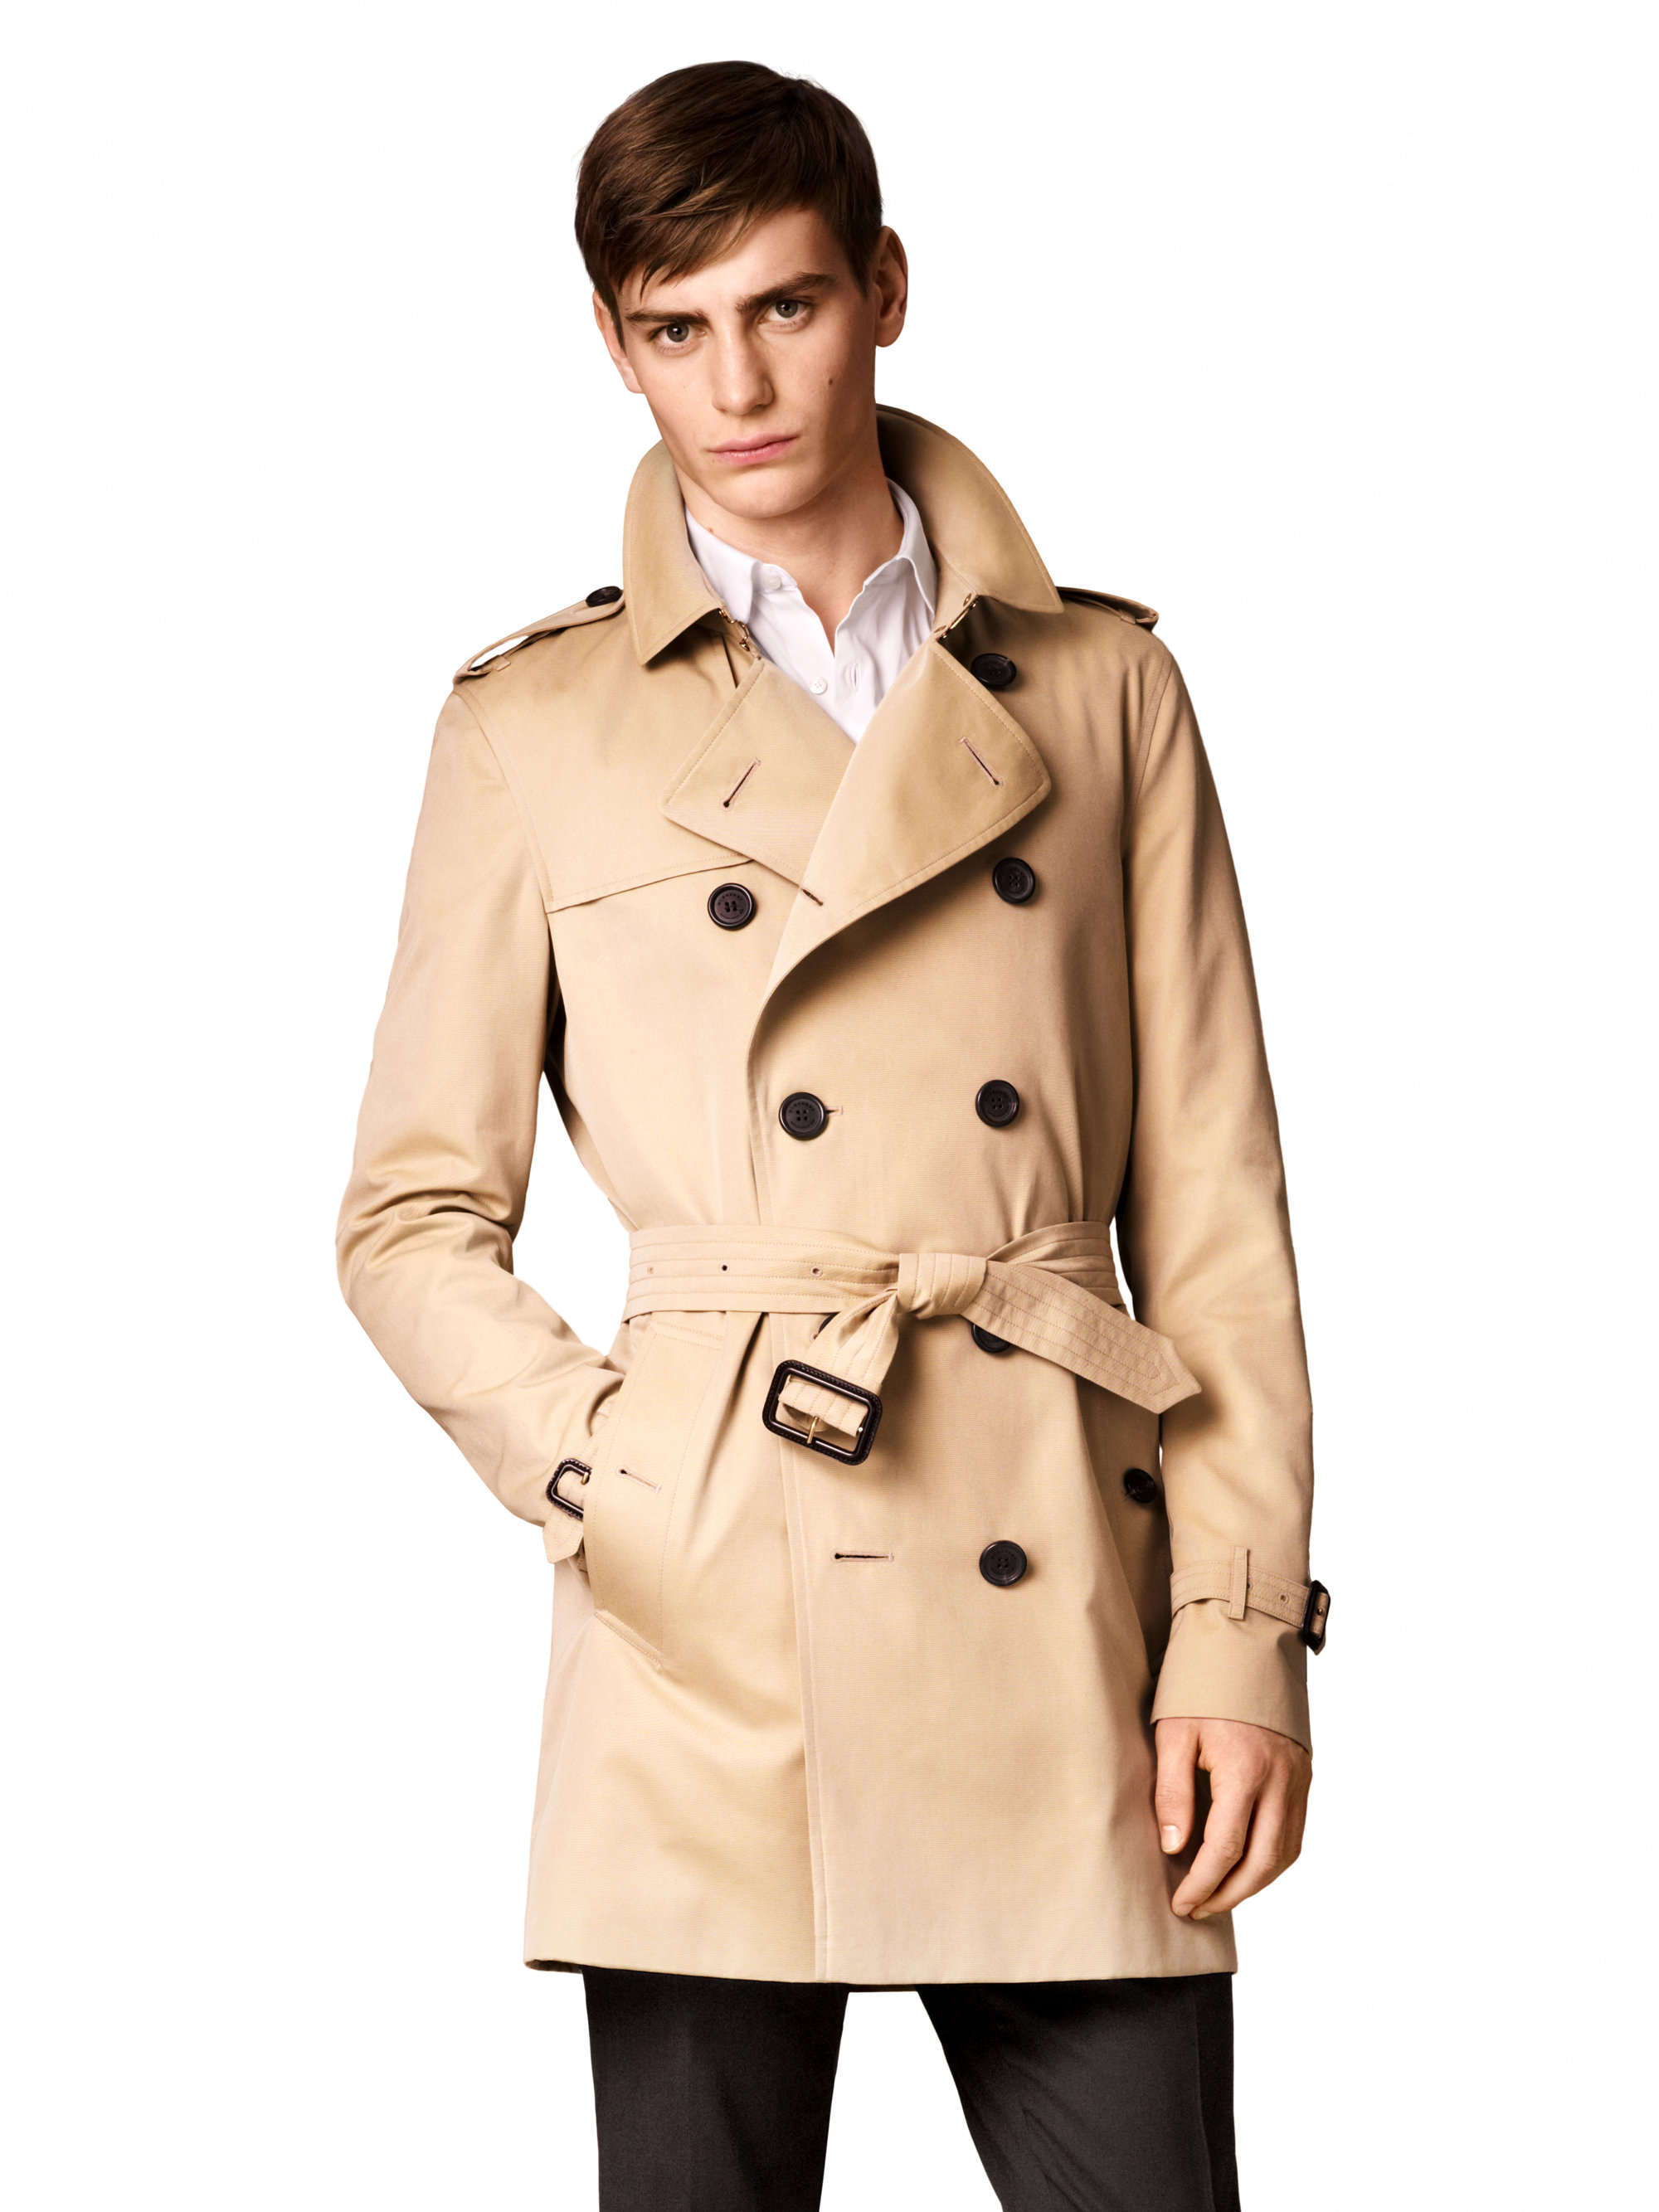 Review] In-depth Burberry Trench Coat 